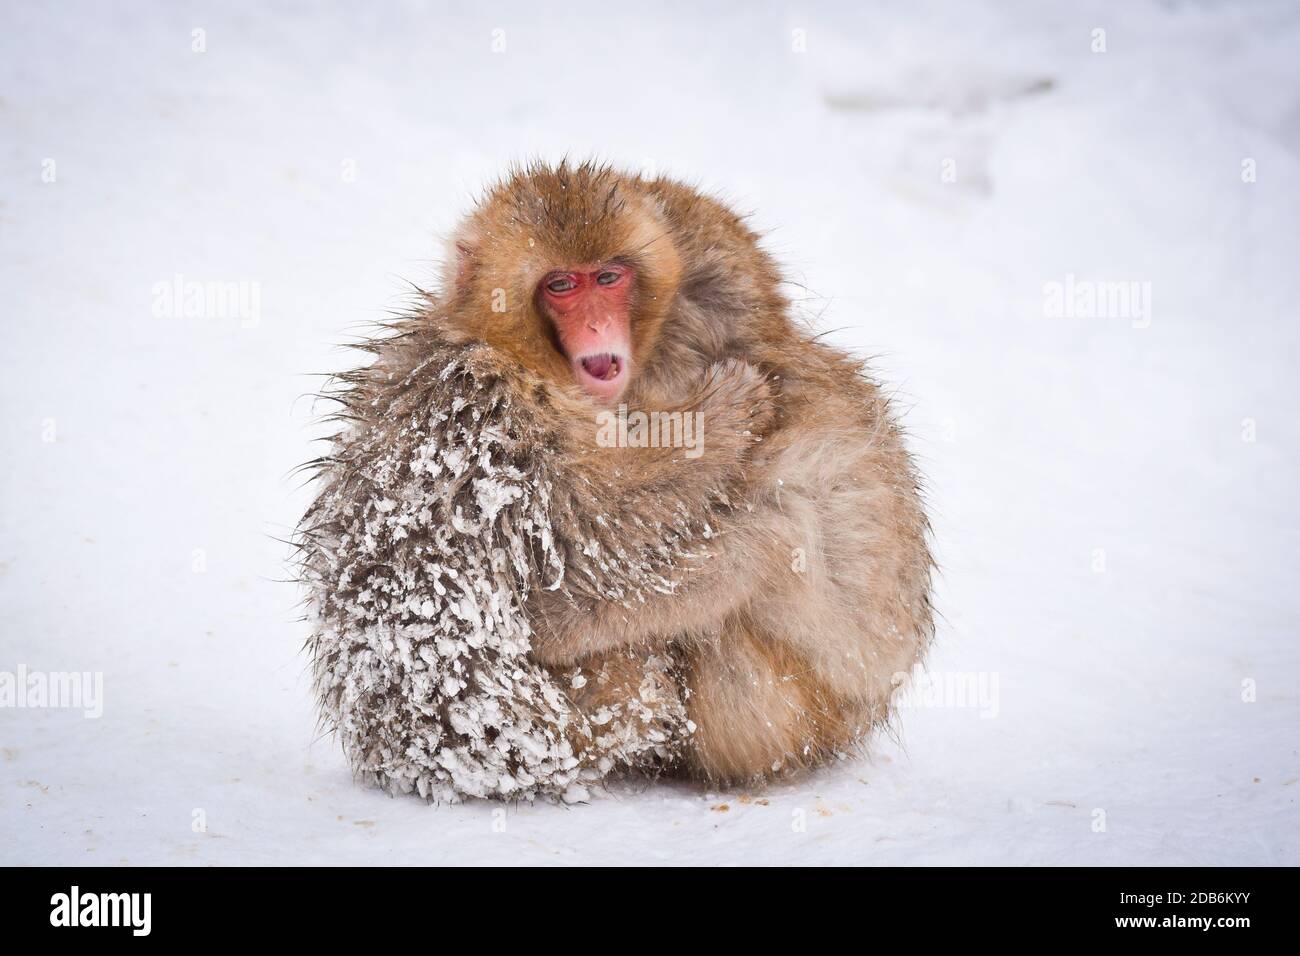 two brown cute baby snow monkeys hugging and sheltering each other from the cold snow with ice in their fur in winter. Wild animals showing love Stock Photo